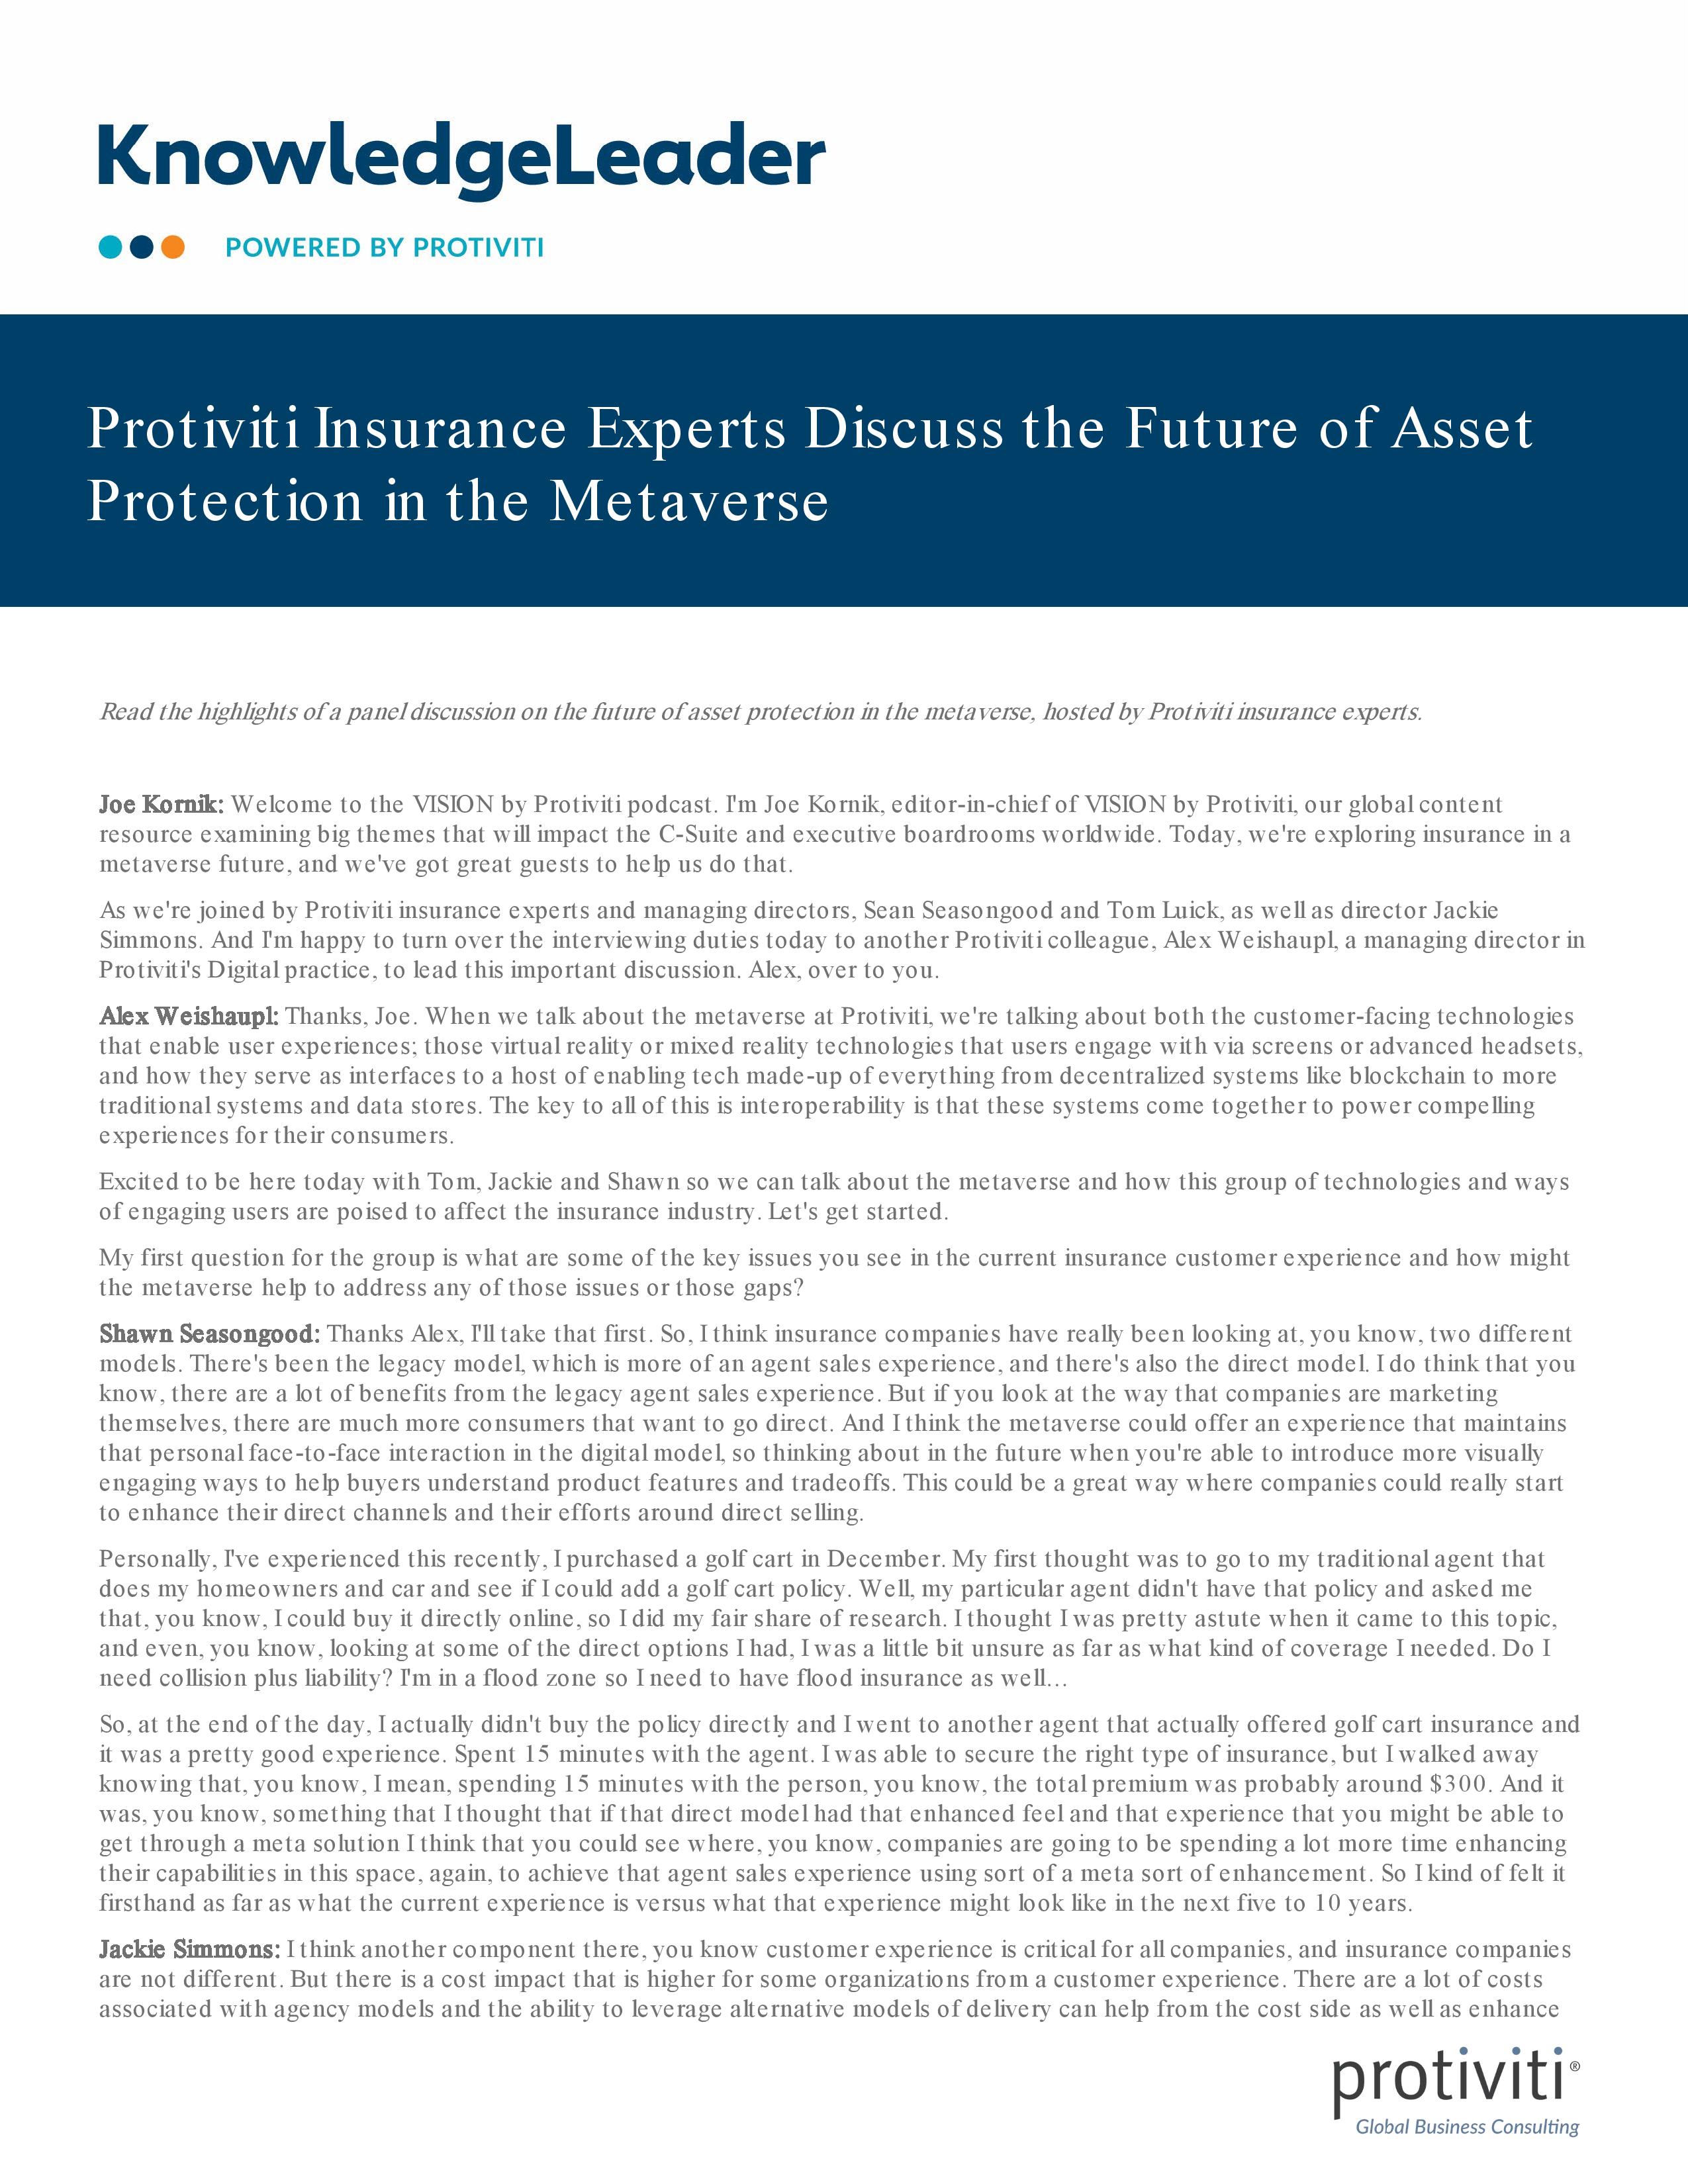 screenshot of the first page of Protiviti Insurance Experts Discuss the Future of Asset Protection in the Metaverse